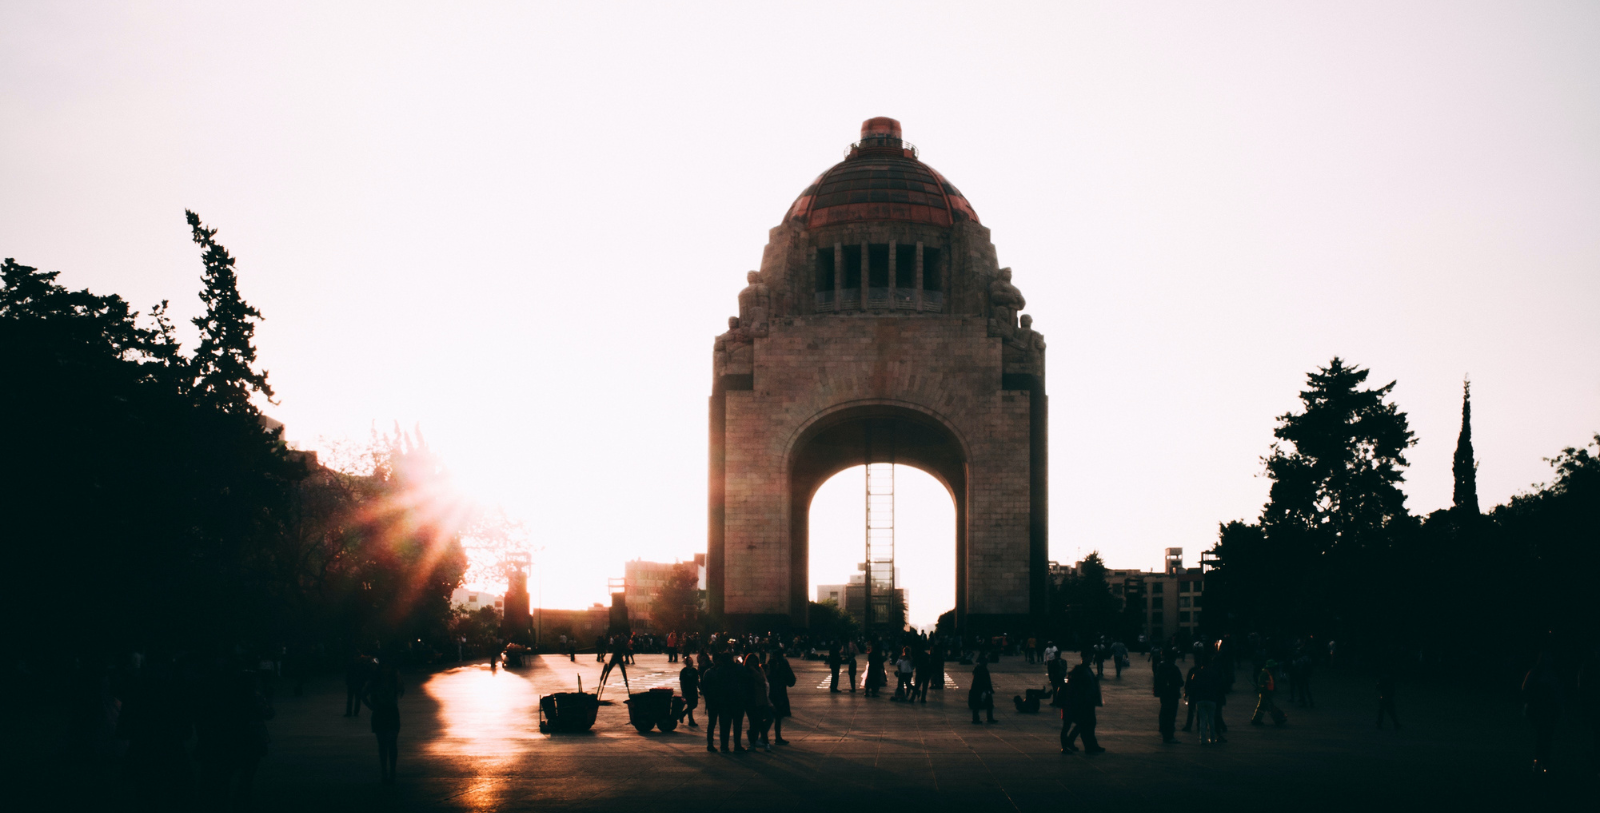 Explore the abundant cultural heritage and fascinating history that surrounds Plaza de la Constitución, Mexico City’s famed town square that dates to the time of the Aztec city of Tenochtitlan.